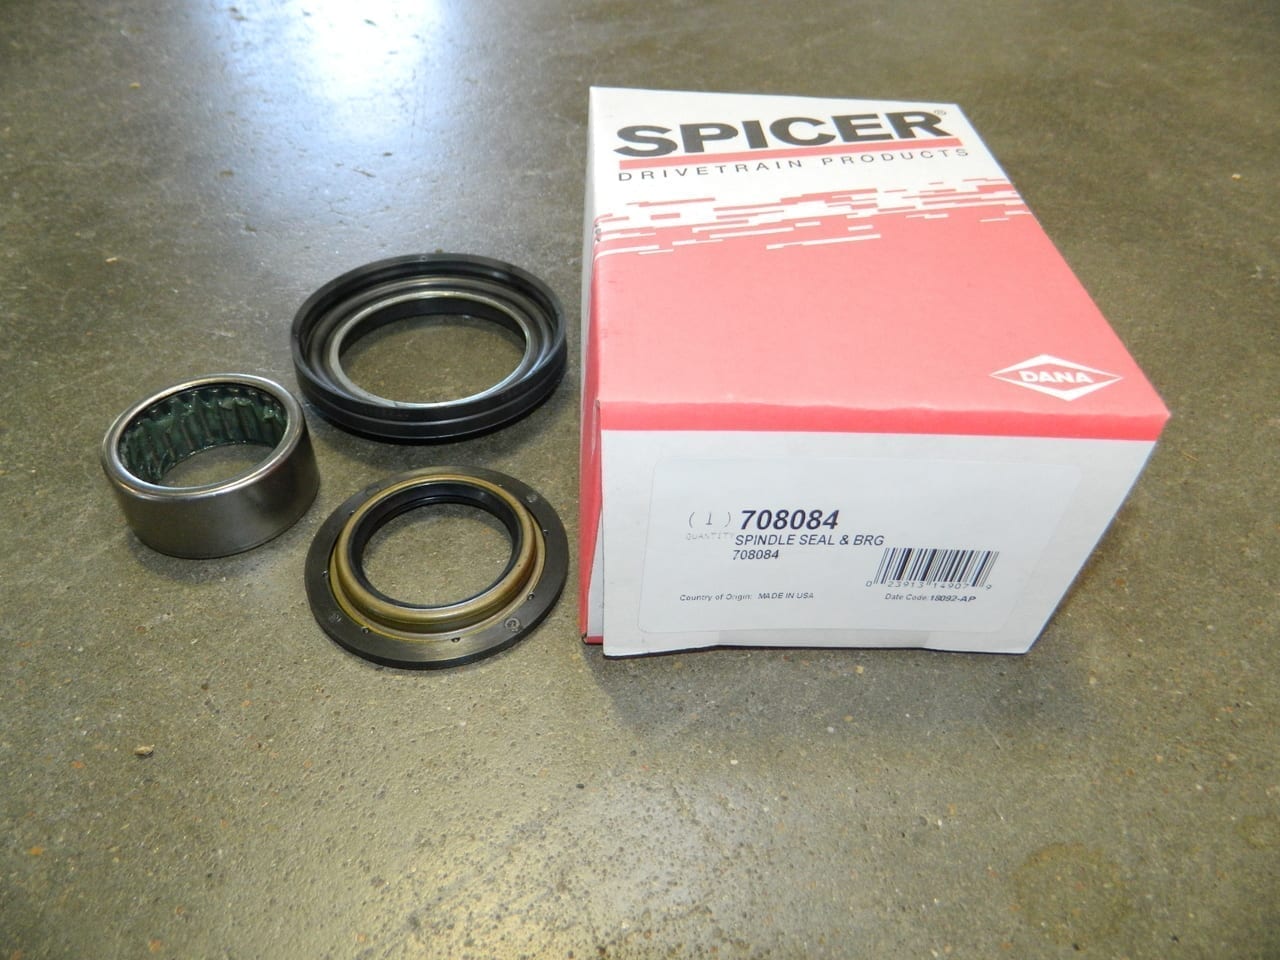 SKF Rear Axle Differential Bearing and Seal Kit for 1992-2011 Ford Crown xq 